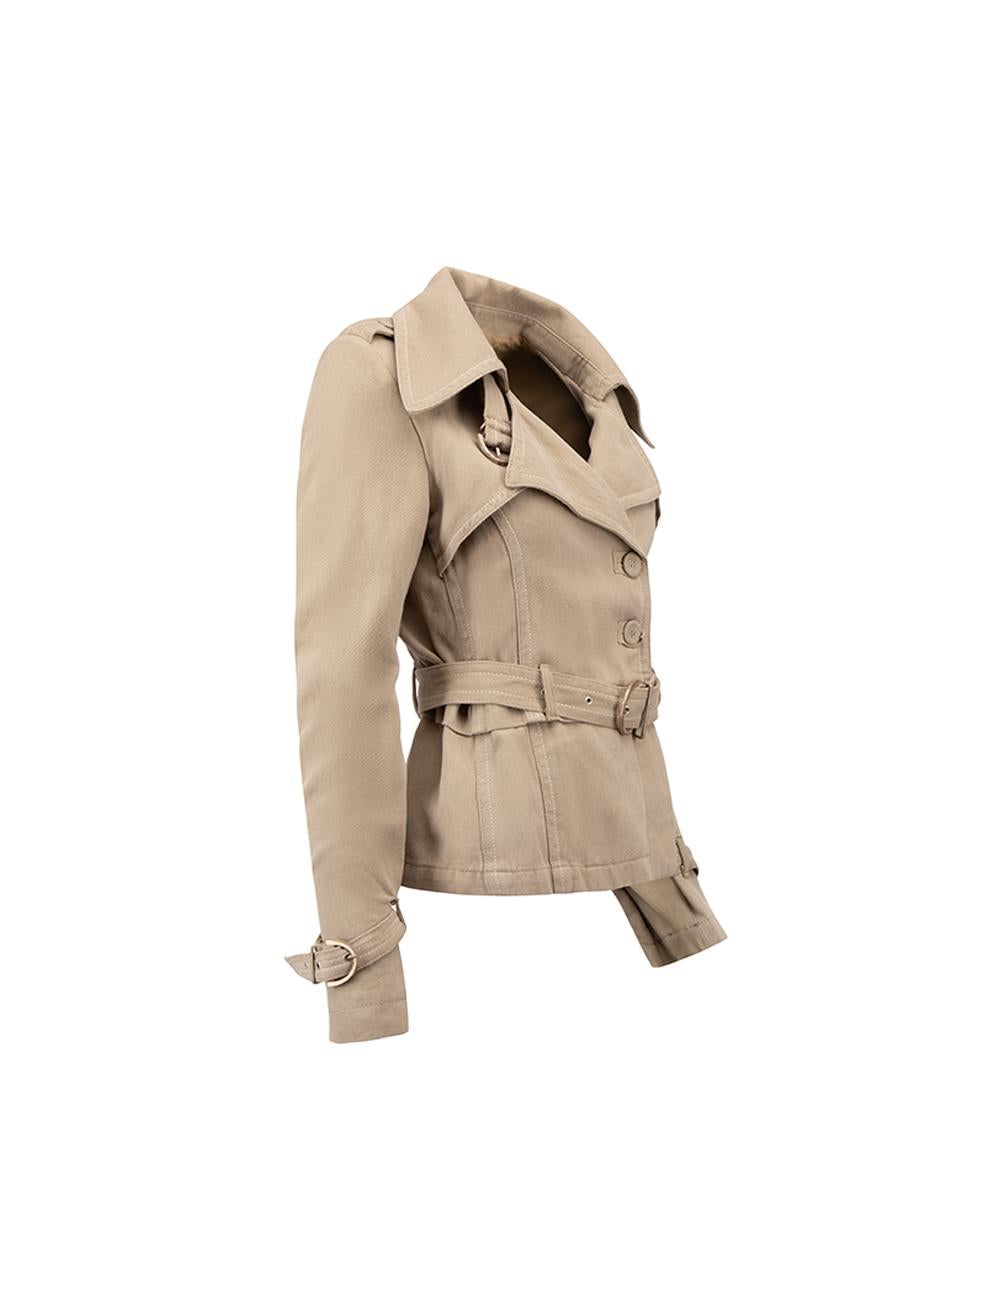 CONDITION is Very good. Hardly any visible wear to jacket is evident on this used Pinko designer resale item.




Details


Beige

Cotton

Fitted jacket

Double breasted

Belted

Buckle strapped cuffs





Made in Italy



Composition

51% Cotton,